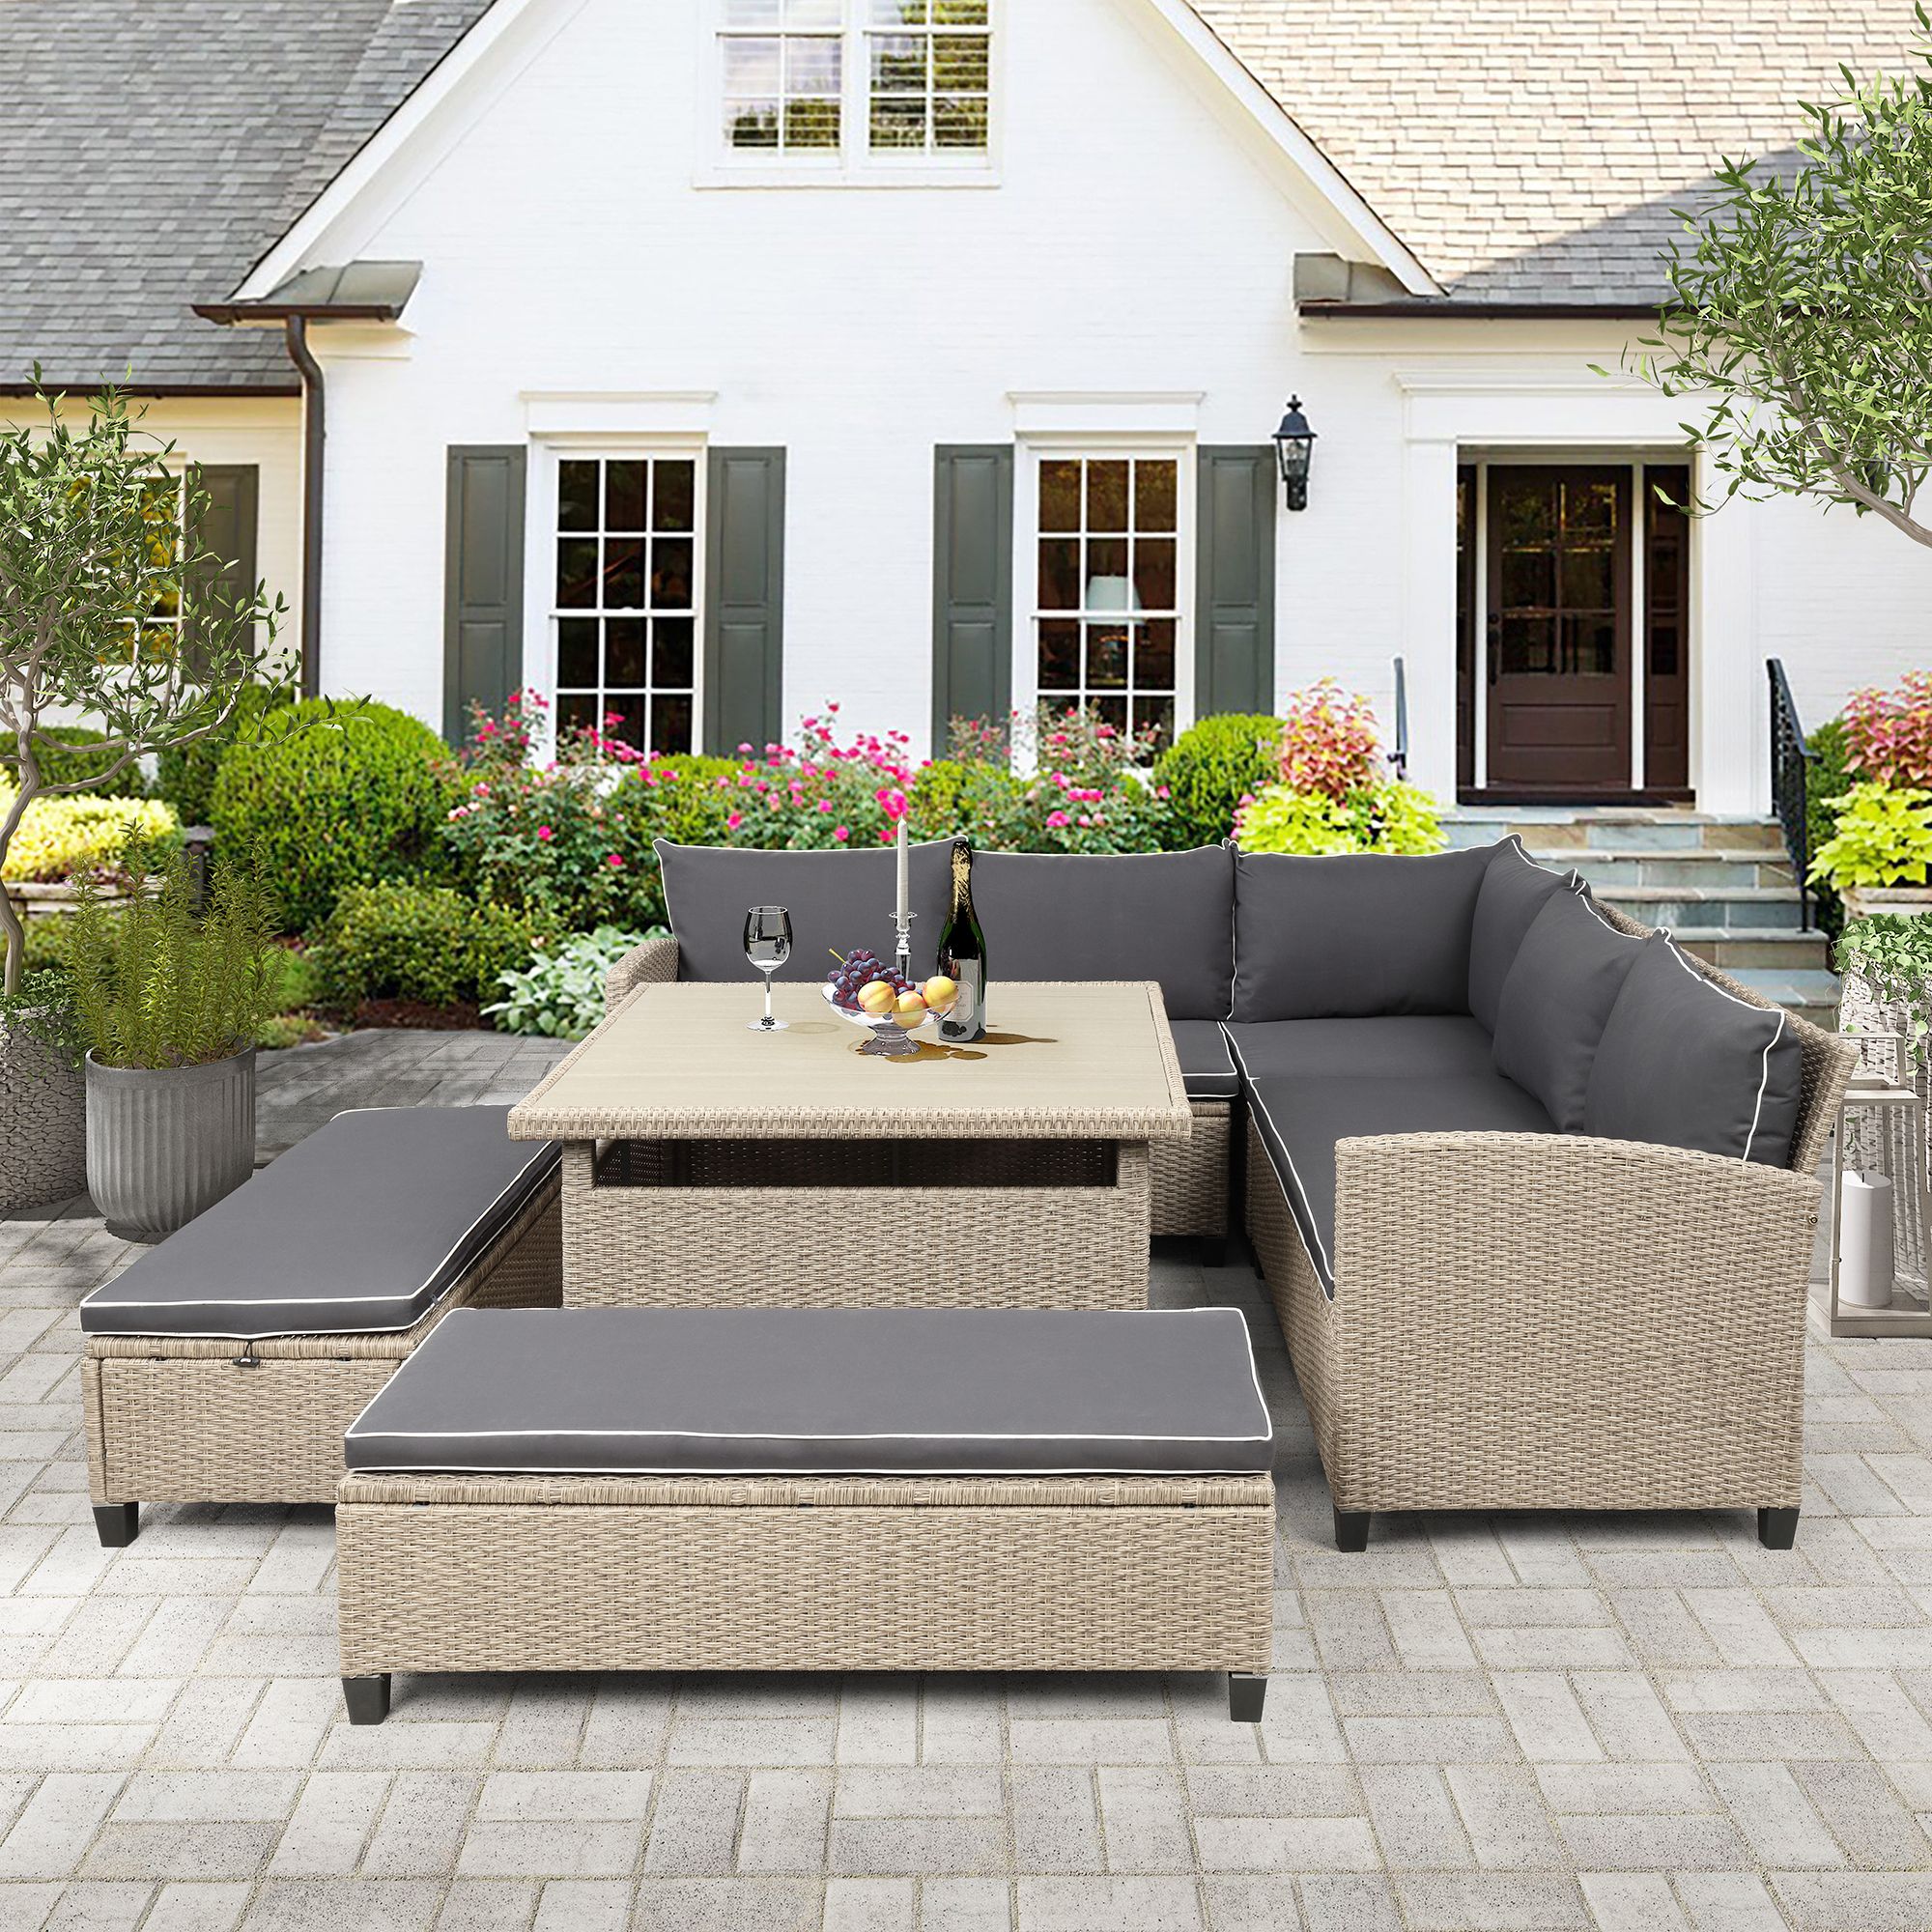 Clearance! Patio Sectional Sofa Set, 6 Piece Outdoor Patio Furniture Pertaining To Outdoor Seating Sectional Patio Sets (View 12 of 15)